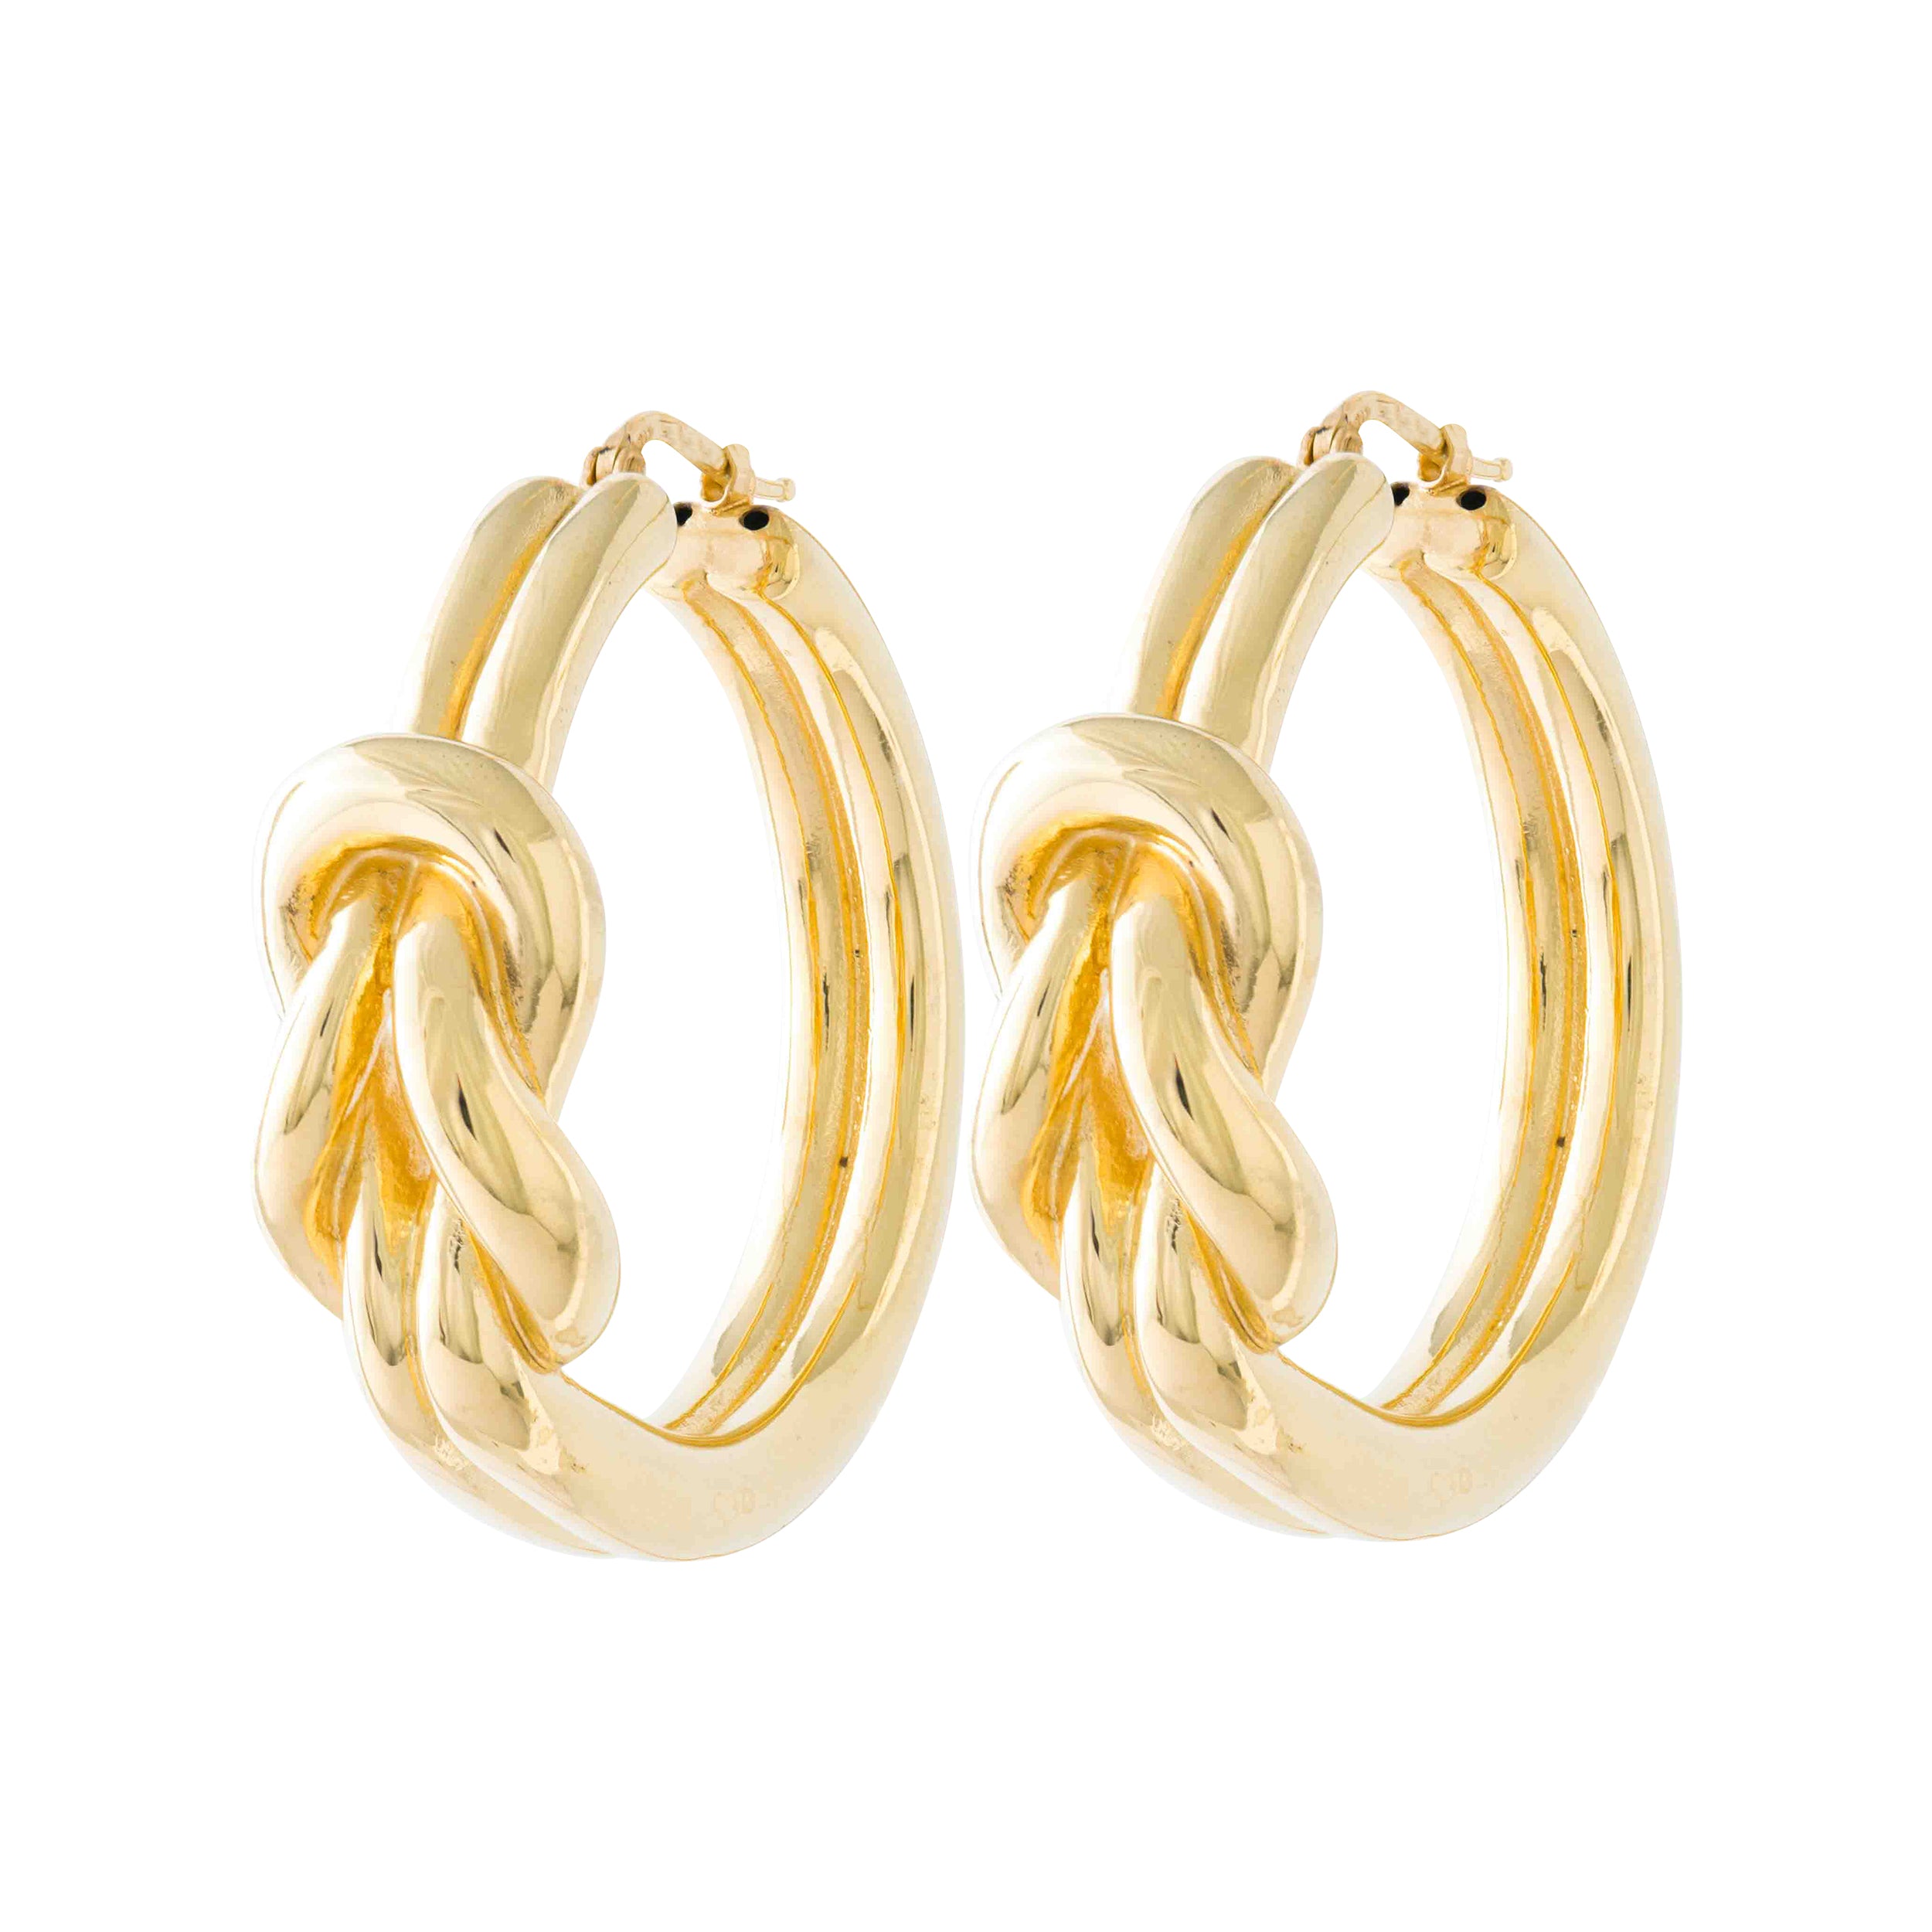 LARGE GOLD DOUBLE KNOT HOOP EARRINGS